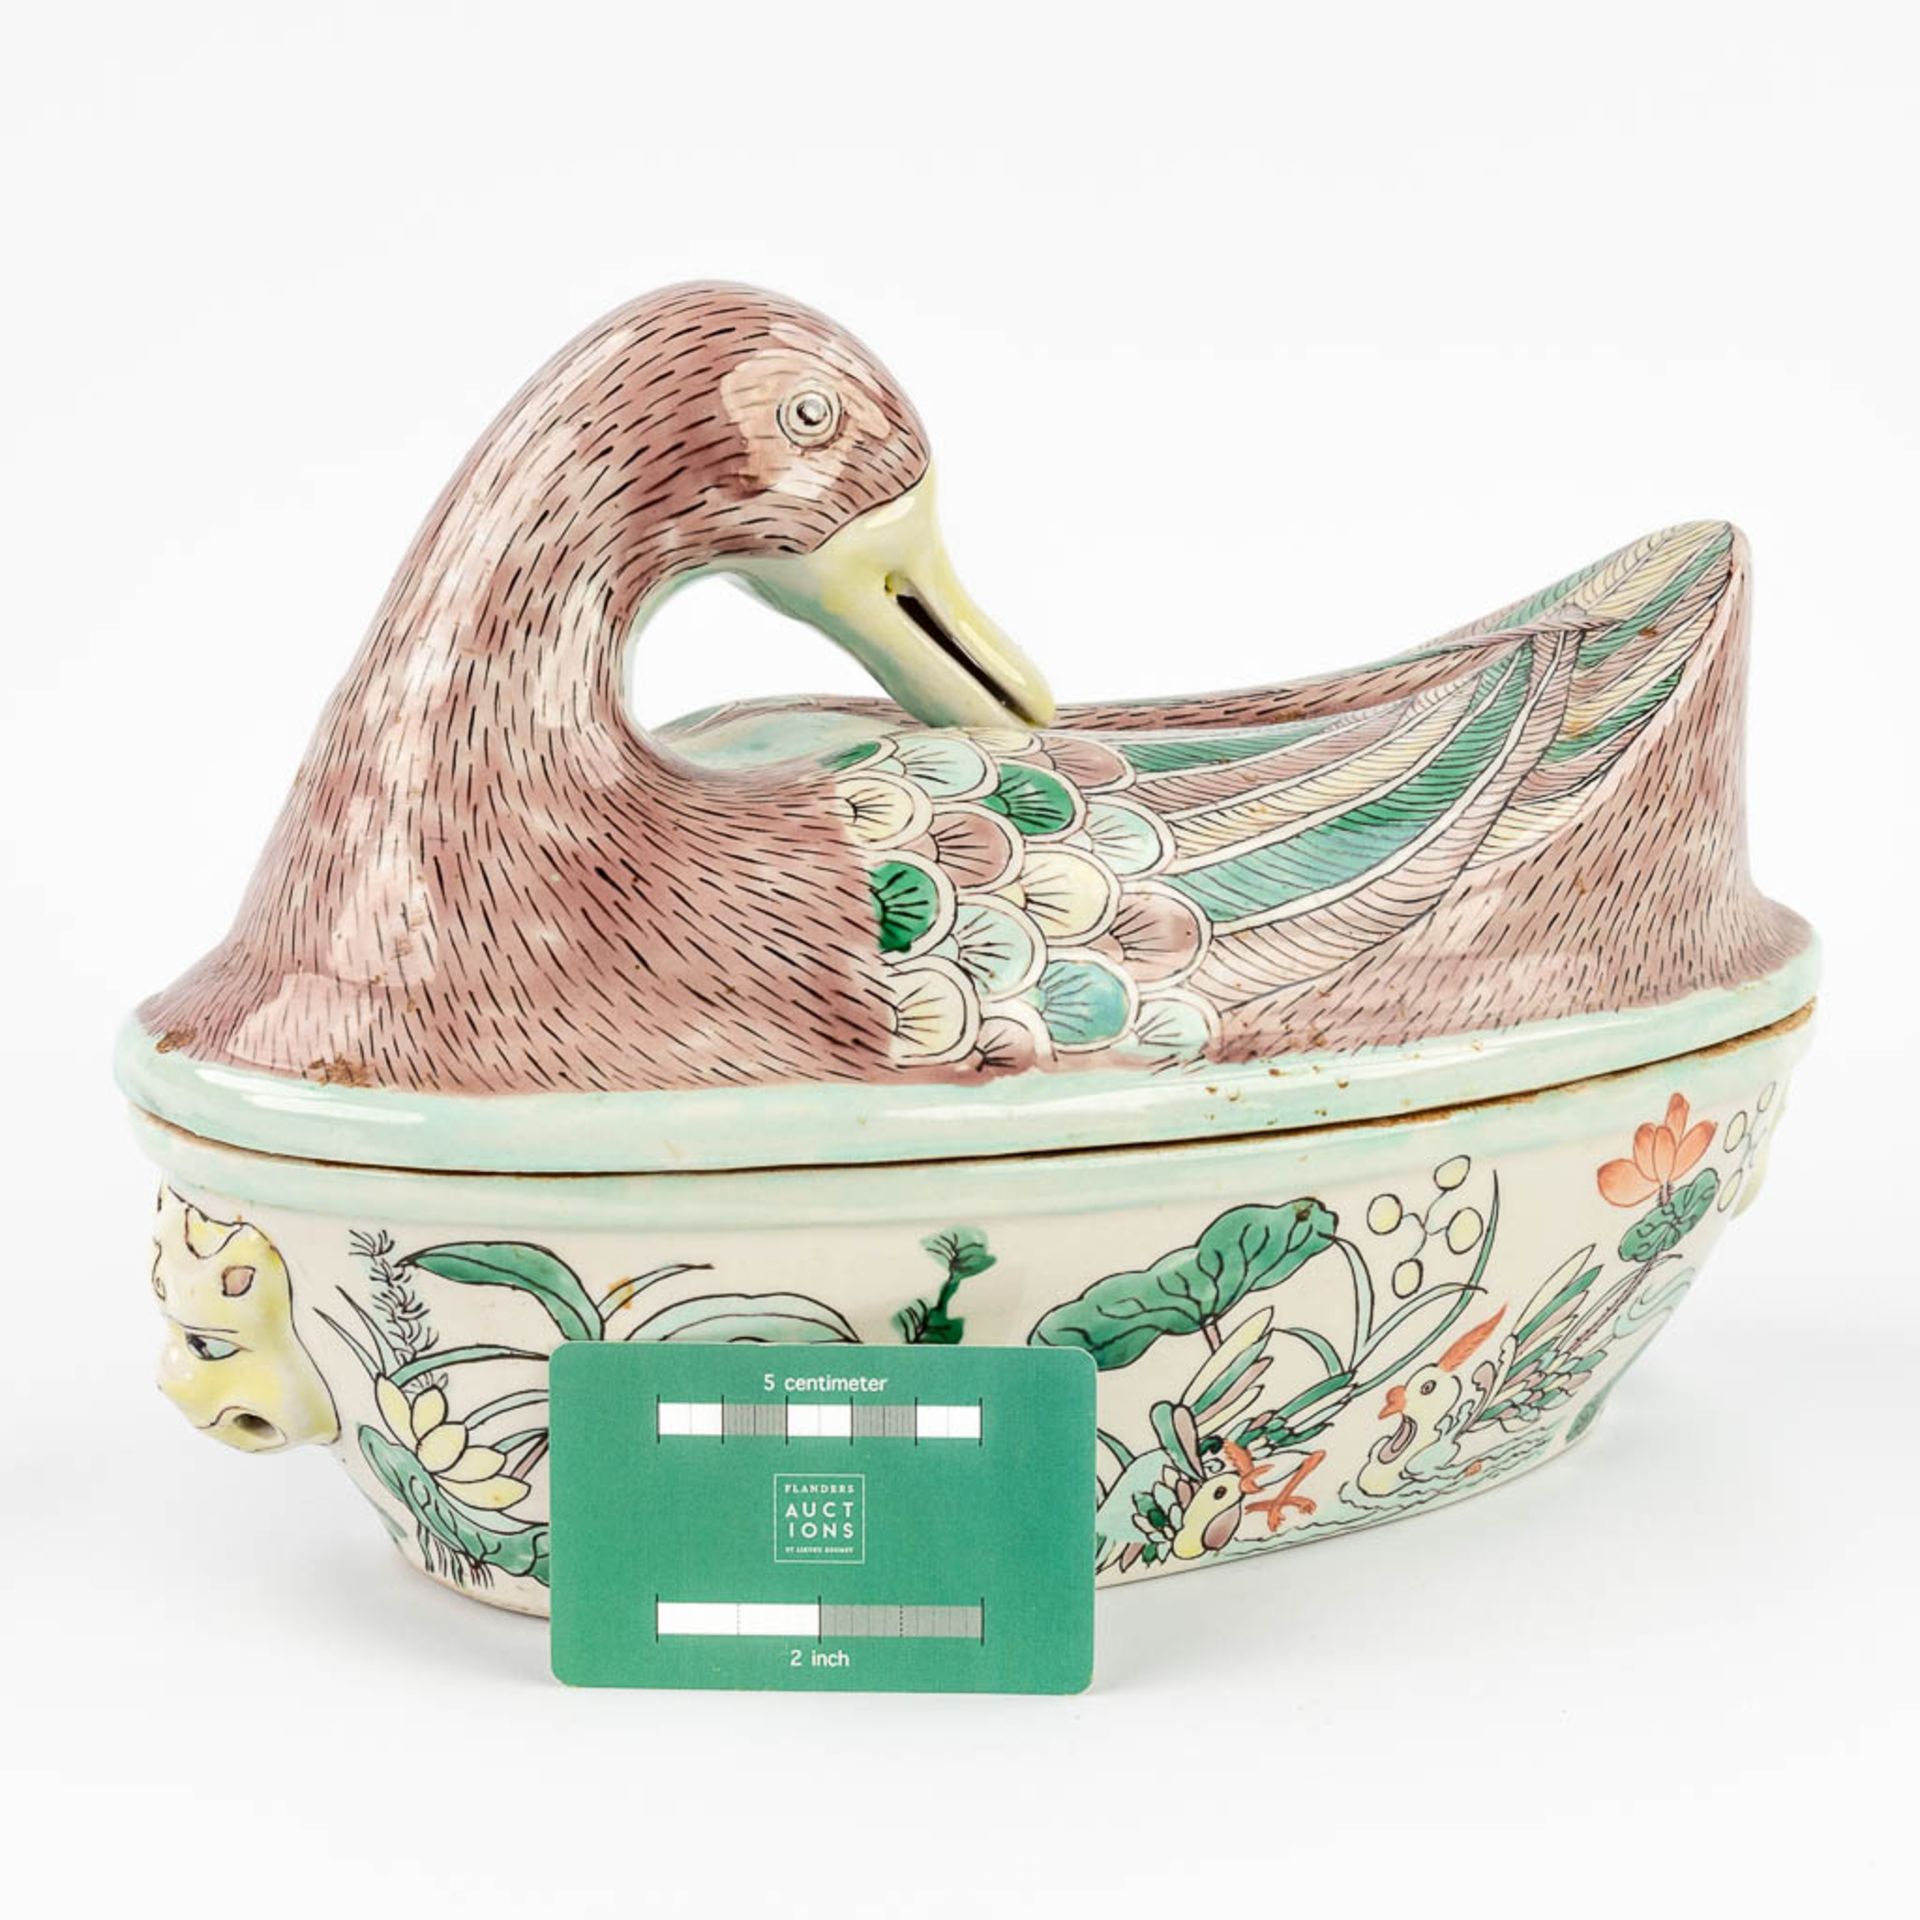 A figurative tureen in the shape of a duck, with hand-painted decor. (17 x 32 x 22cm) - Image 8 of 13